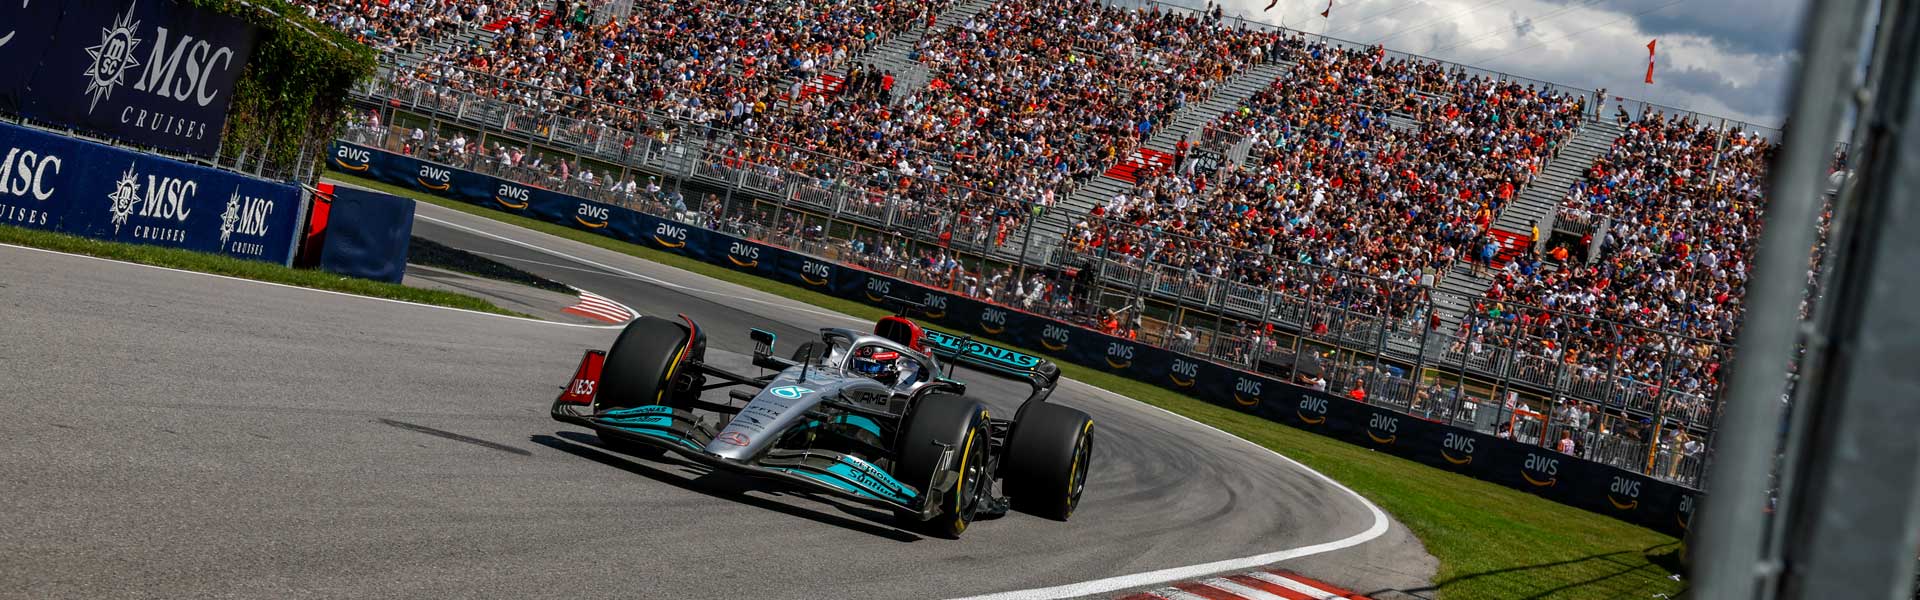 It’s Hamilton in P3 and Russell in P4 at the Canadian GP!